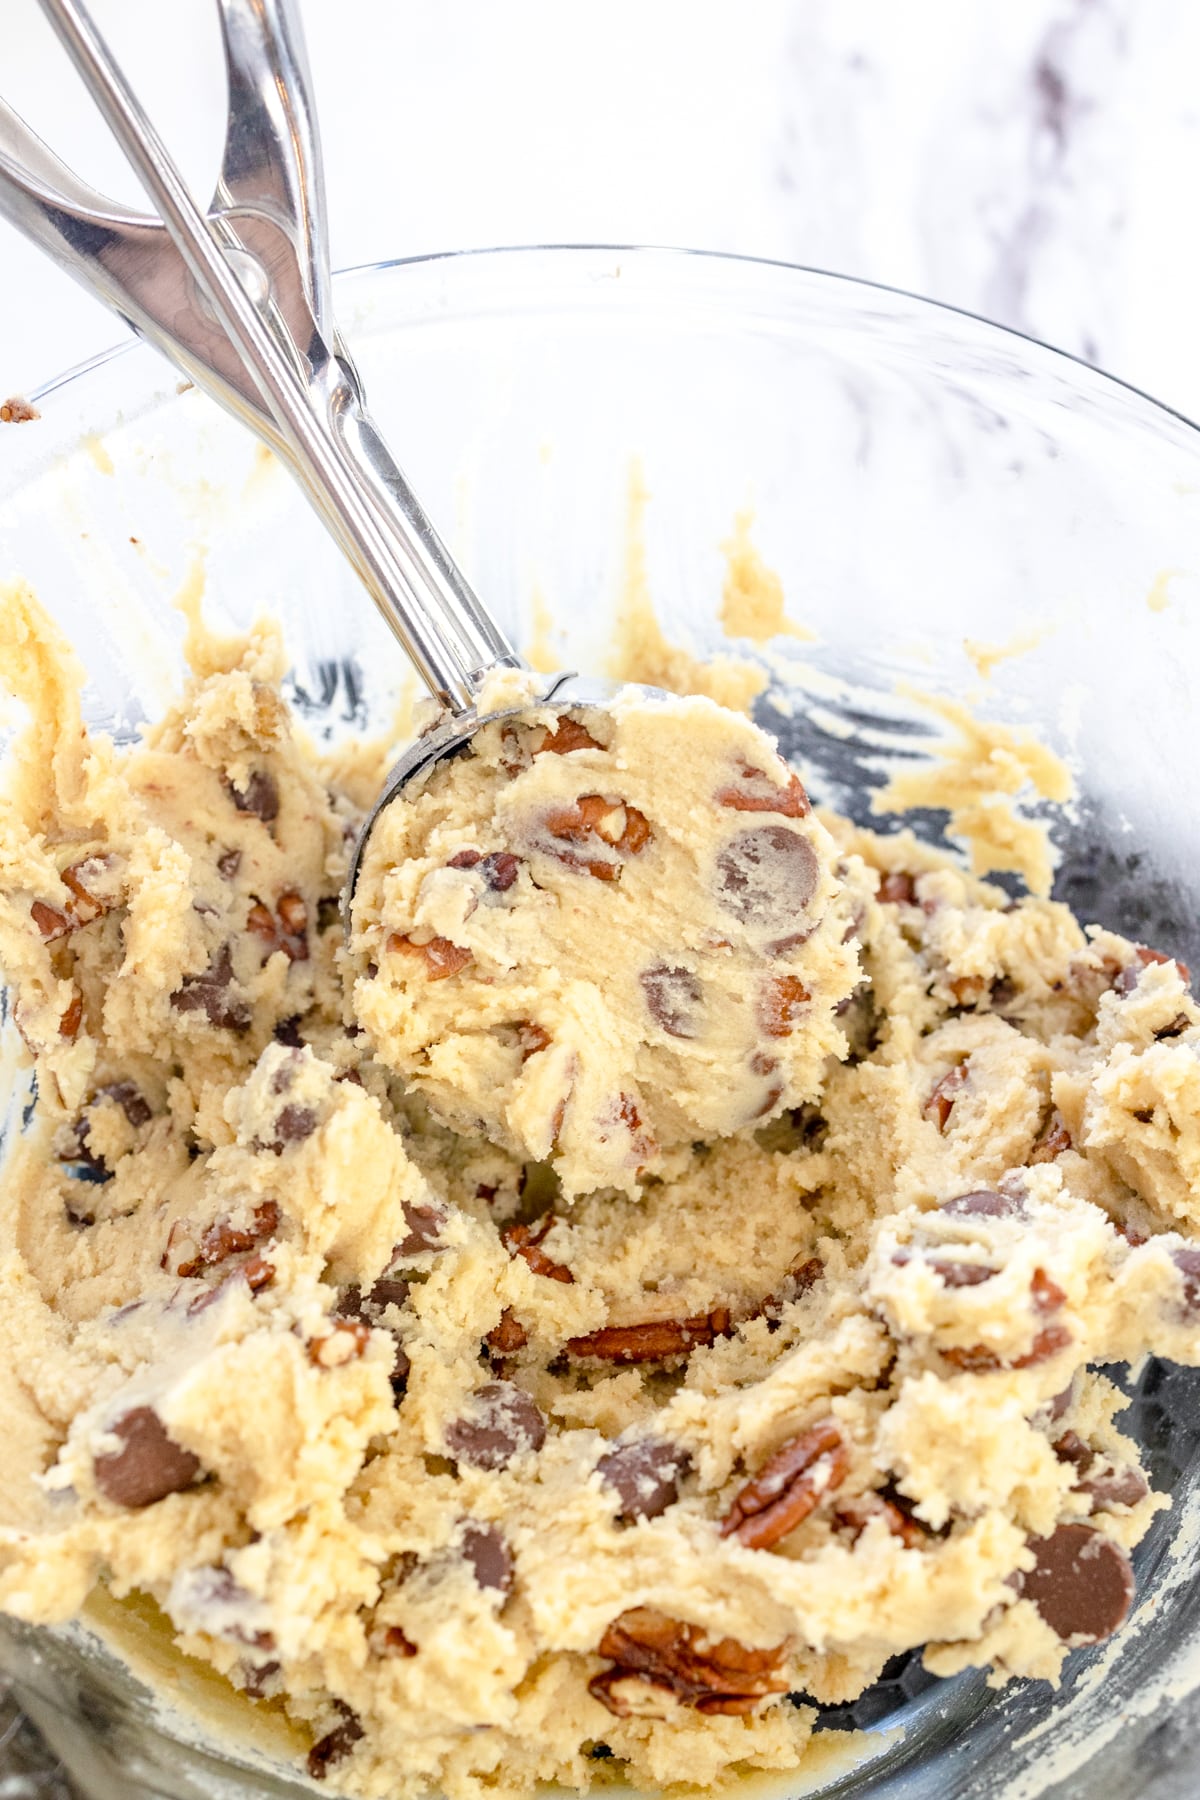 Top view of a glass bowl with chocolate chip pecan cookie dough being scooped out with a cookie scoop.